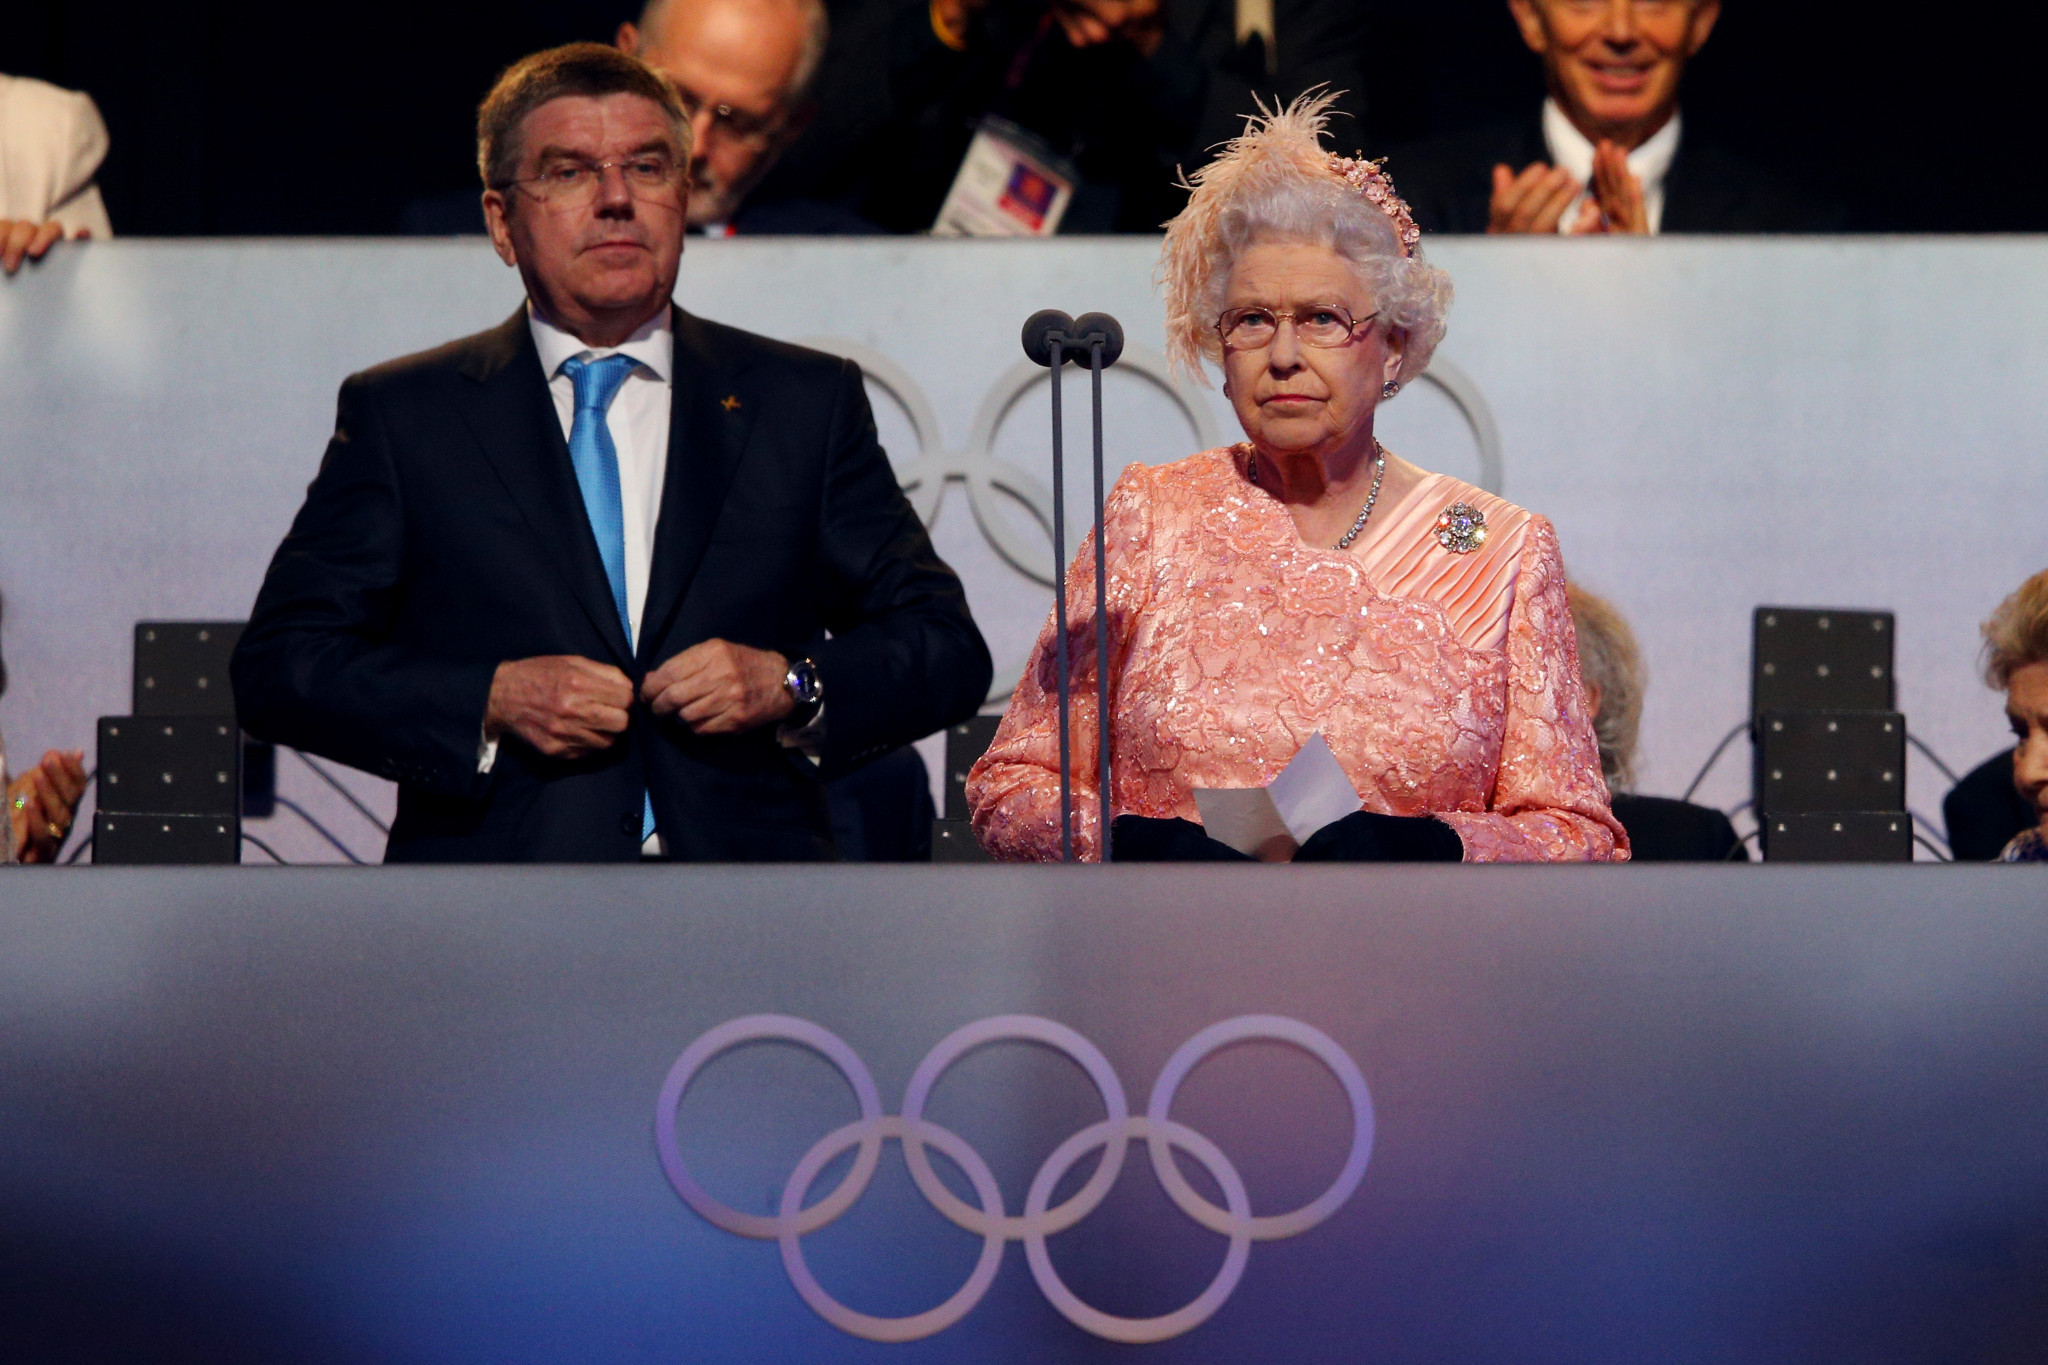 Queen Elizabeth II opens the London 2012 Olympics ©Getty Images